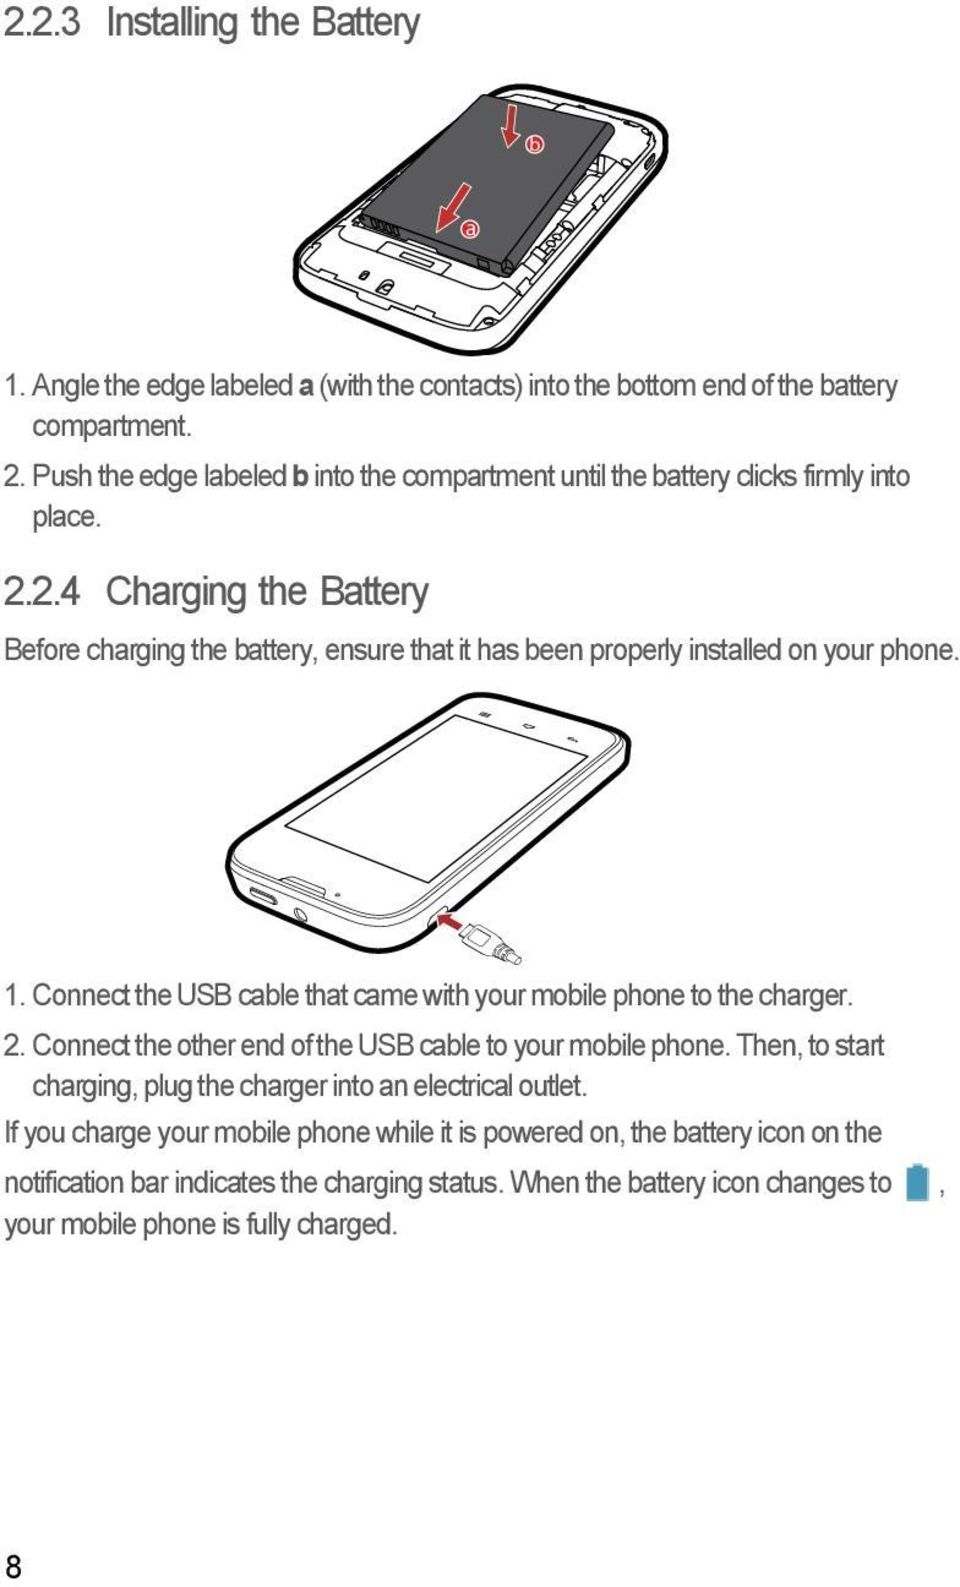 2.4 Charging the Battery Before charging the battery, ensure that it has been properly installed on your phone. 1. Connect the USB cable that came with your mobile phone to the charger.